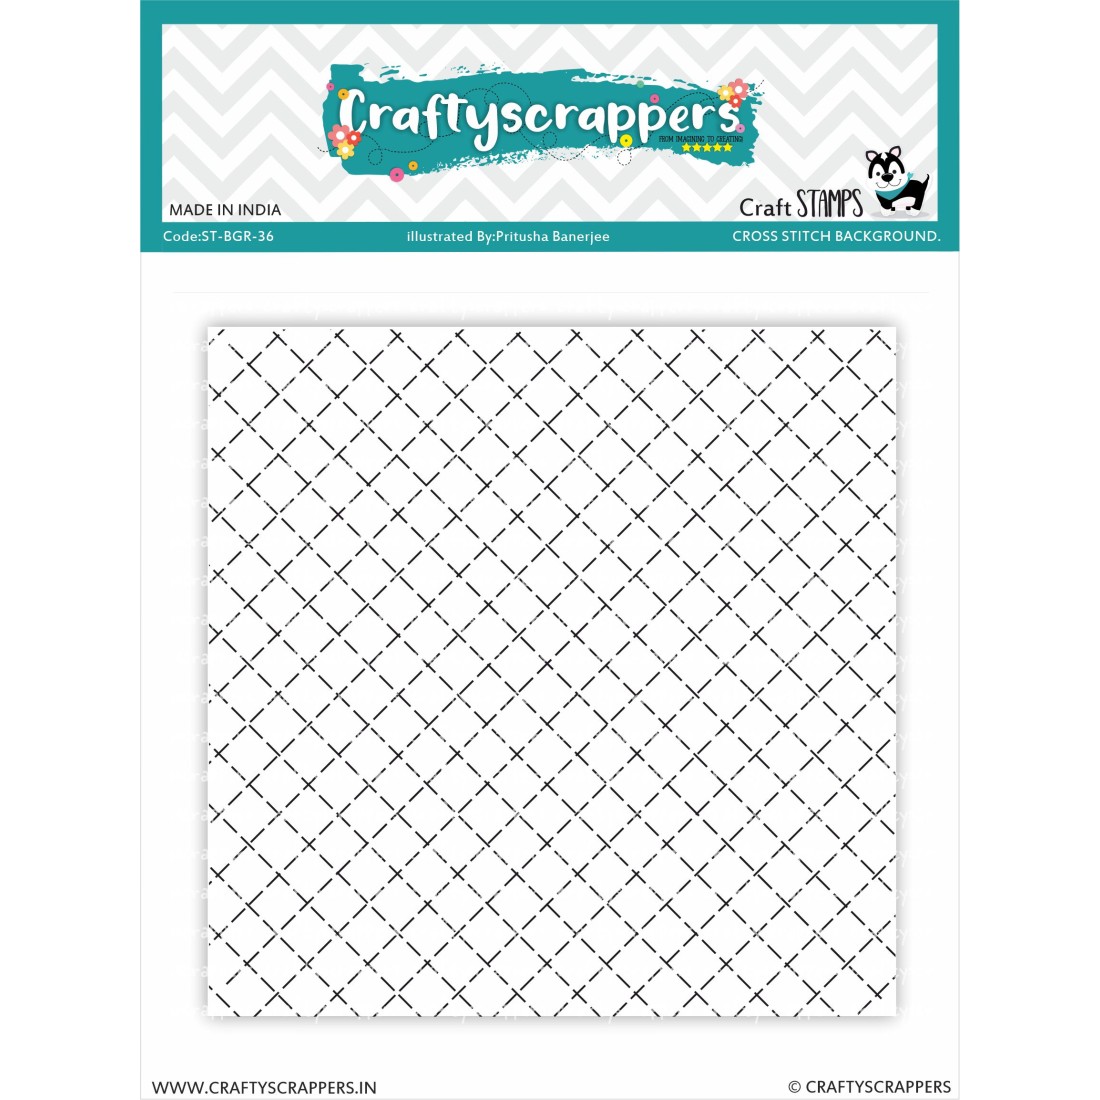 Craftyscrappers Stamps- CROSS STITCH BACKGROUND